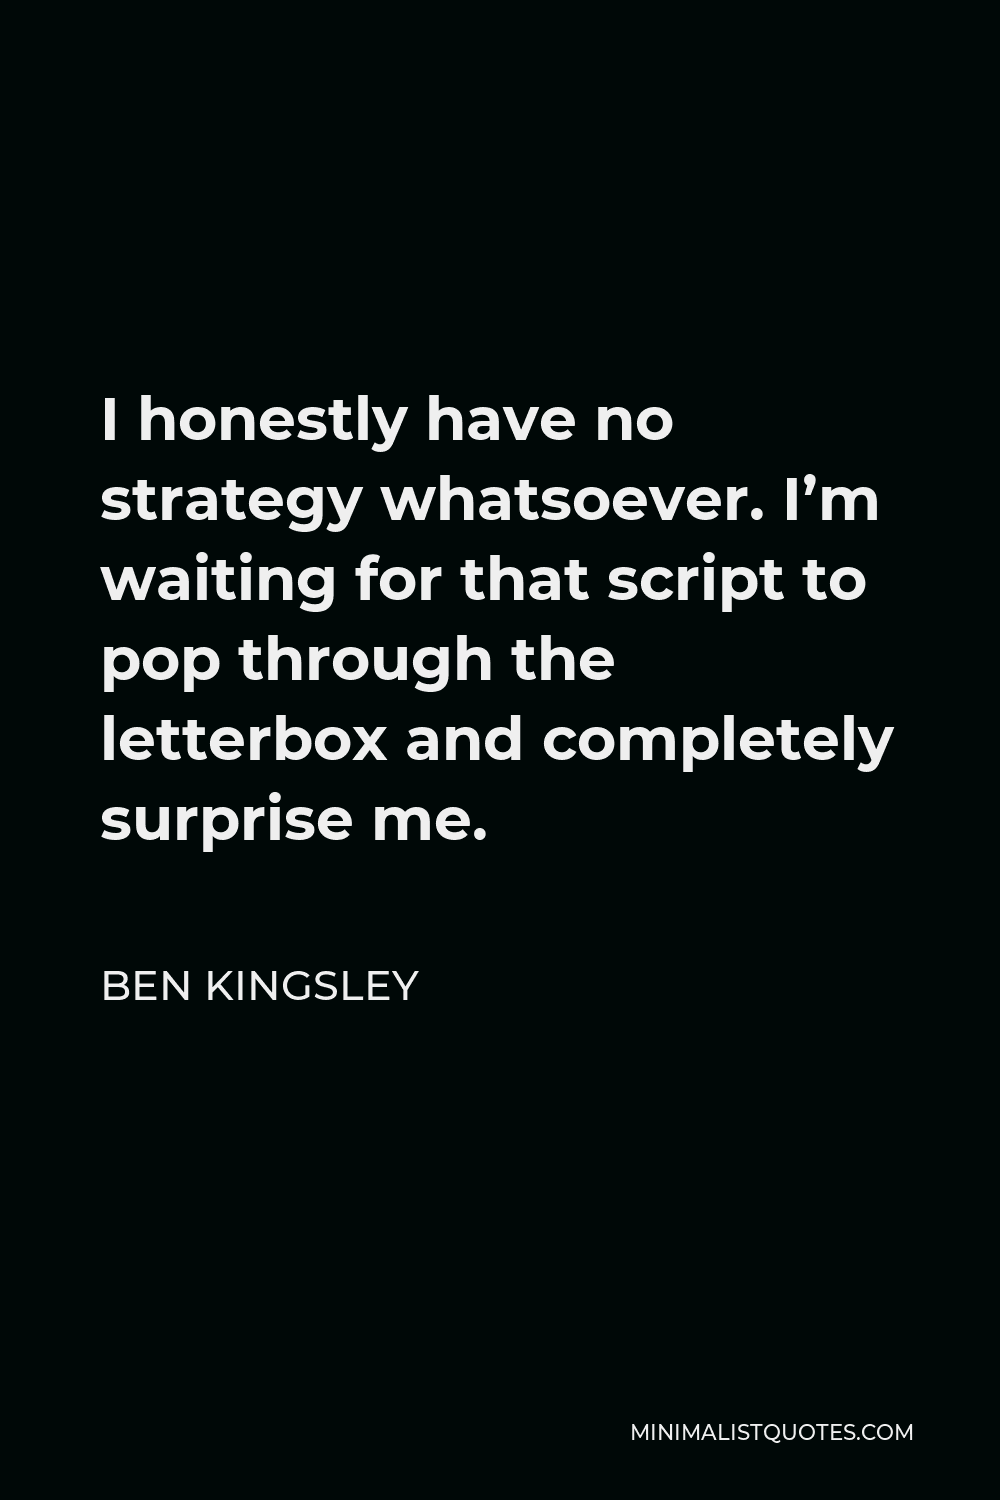 Ben Kingsley Quote - I honestly have no strategy whatsoever. I’m waiting for that script to pop through the letterbox and completely surprise me.